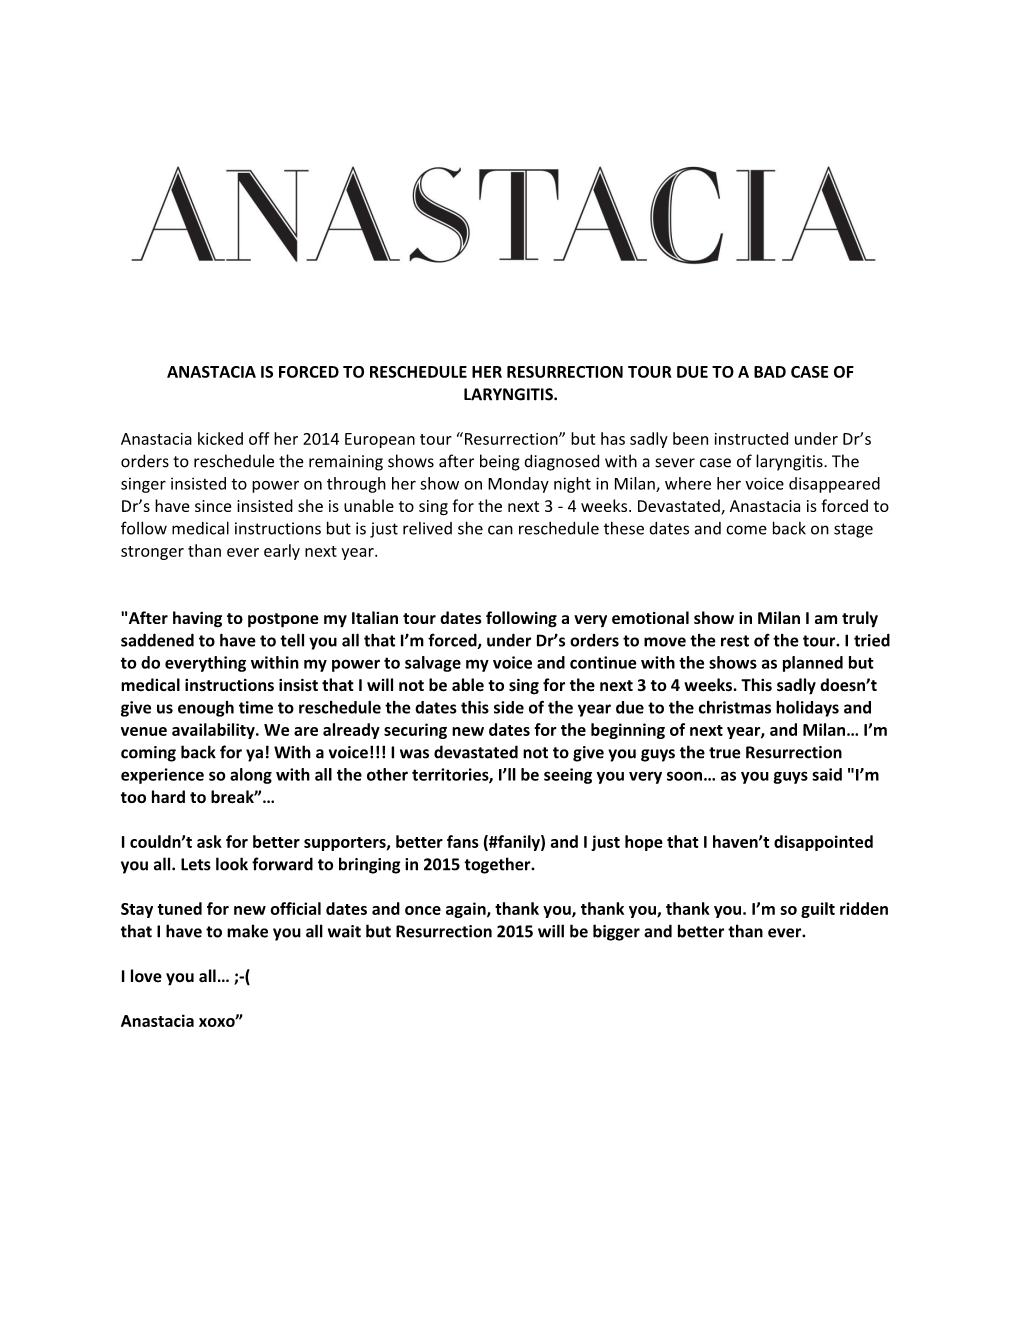 Anastacia Is Forced to Reschedule Her Resurrection Tour Due to a Bad Case of Laryngitis